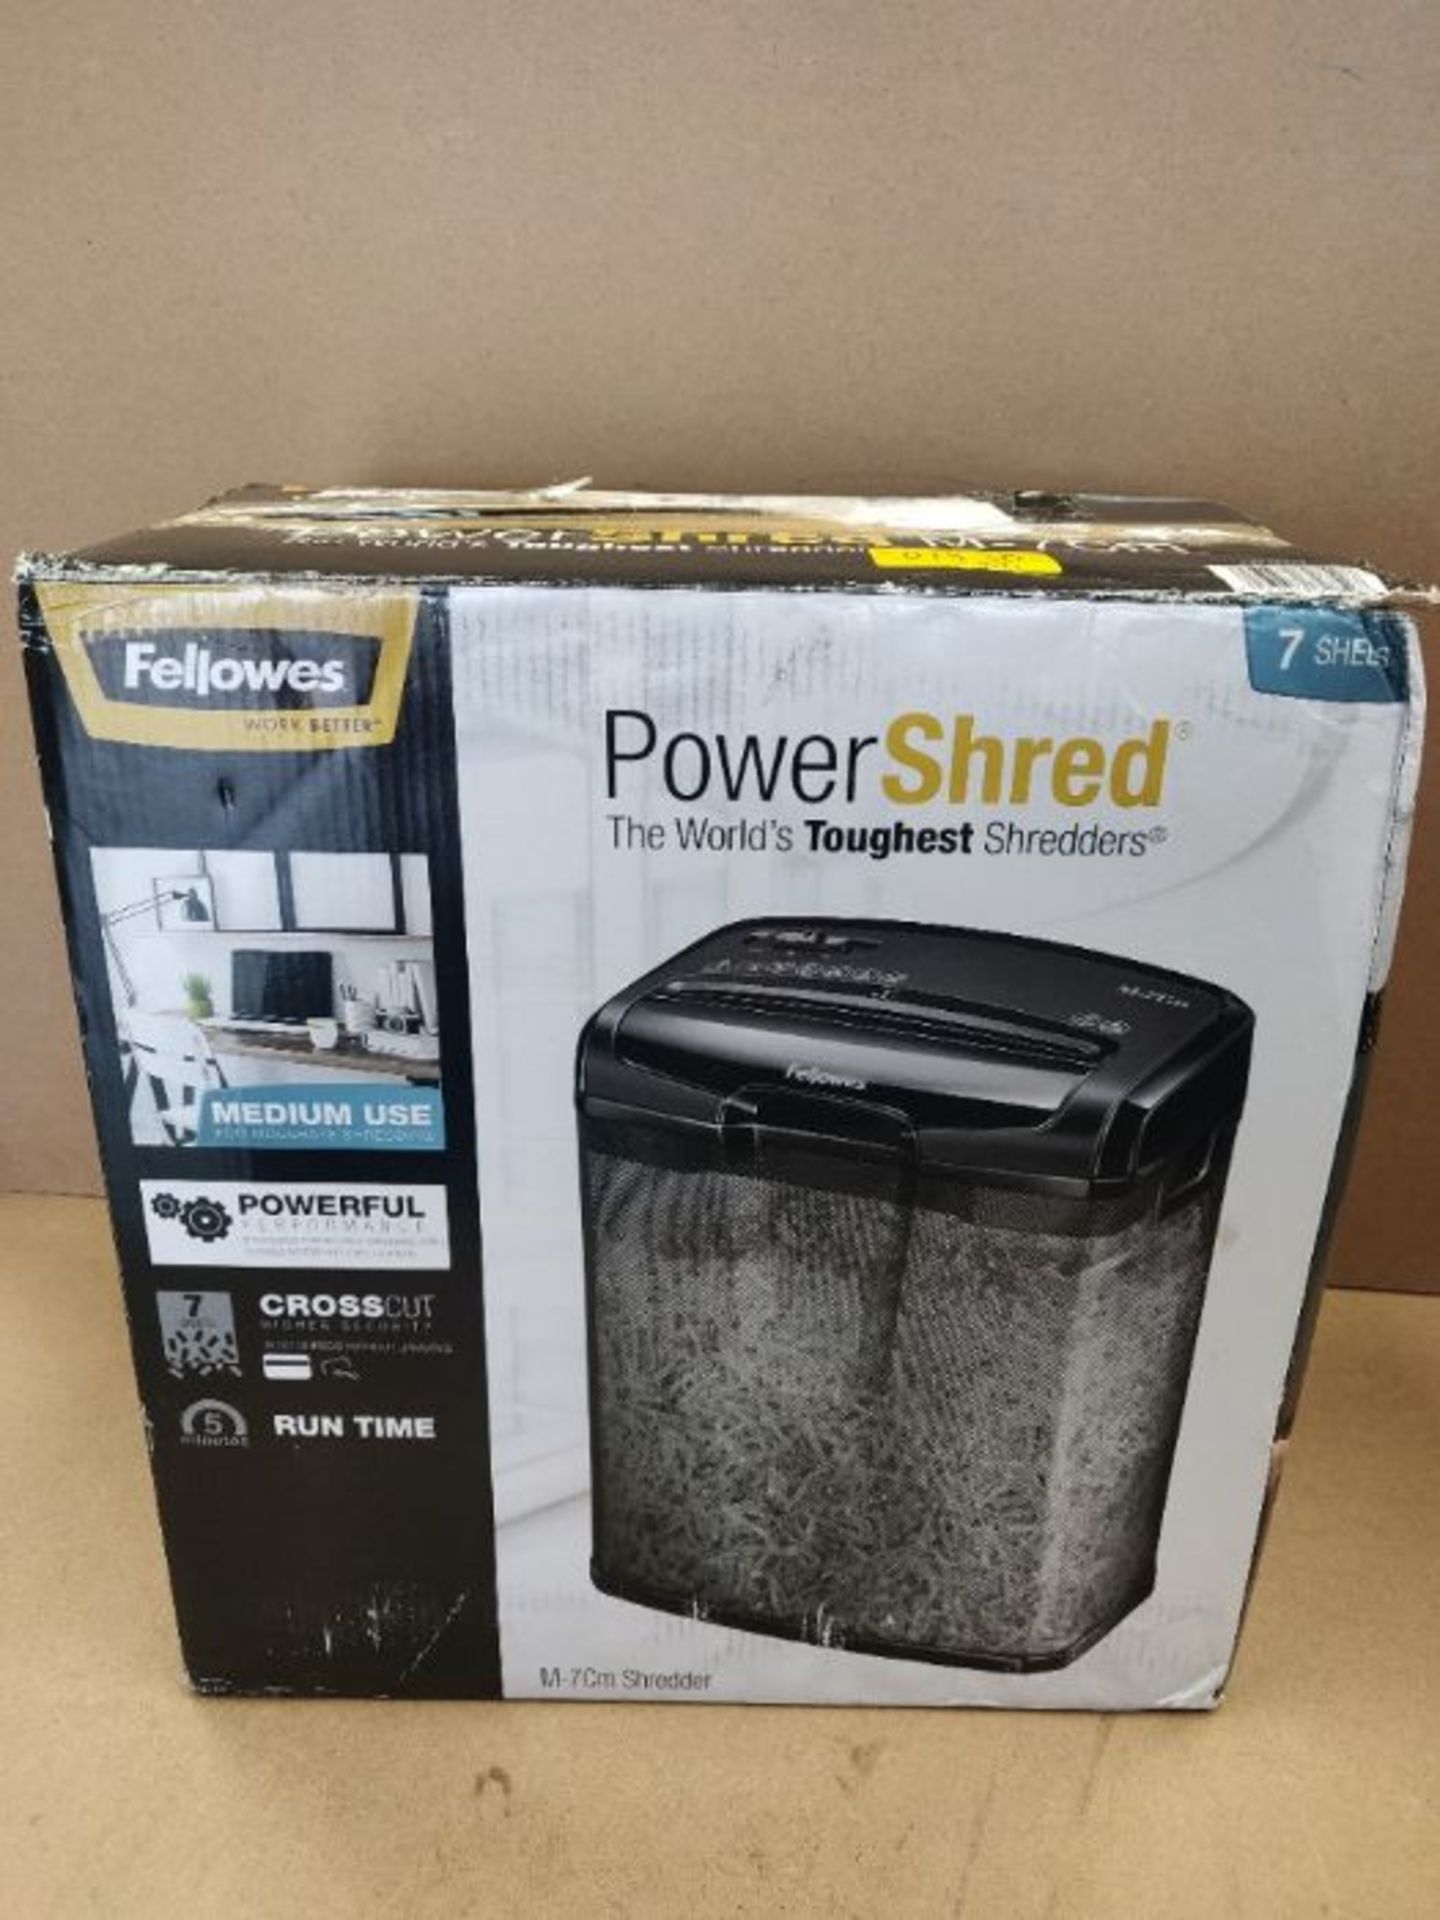 Fellowes Powershred M-7CM Personal 7 Sheet Cross Cut Paper Shredder for Home Use - Image 2 of 3